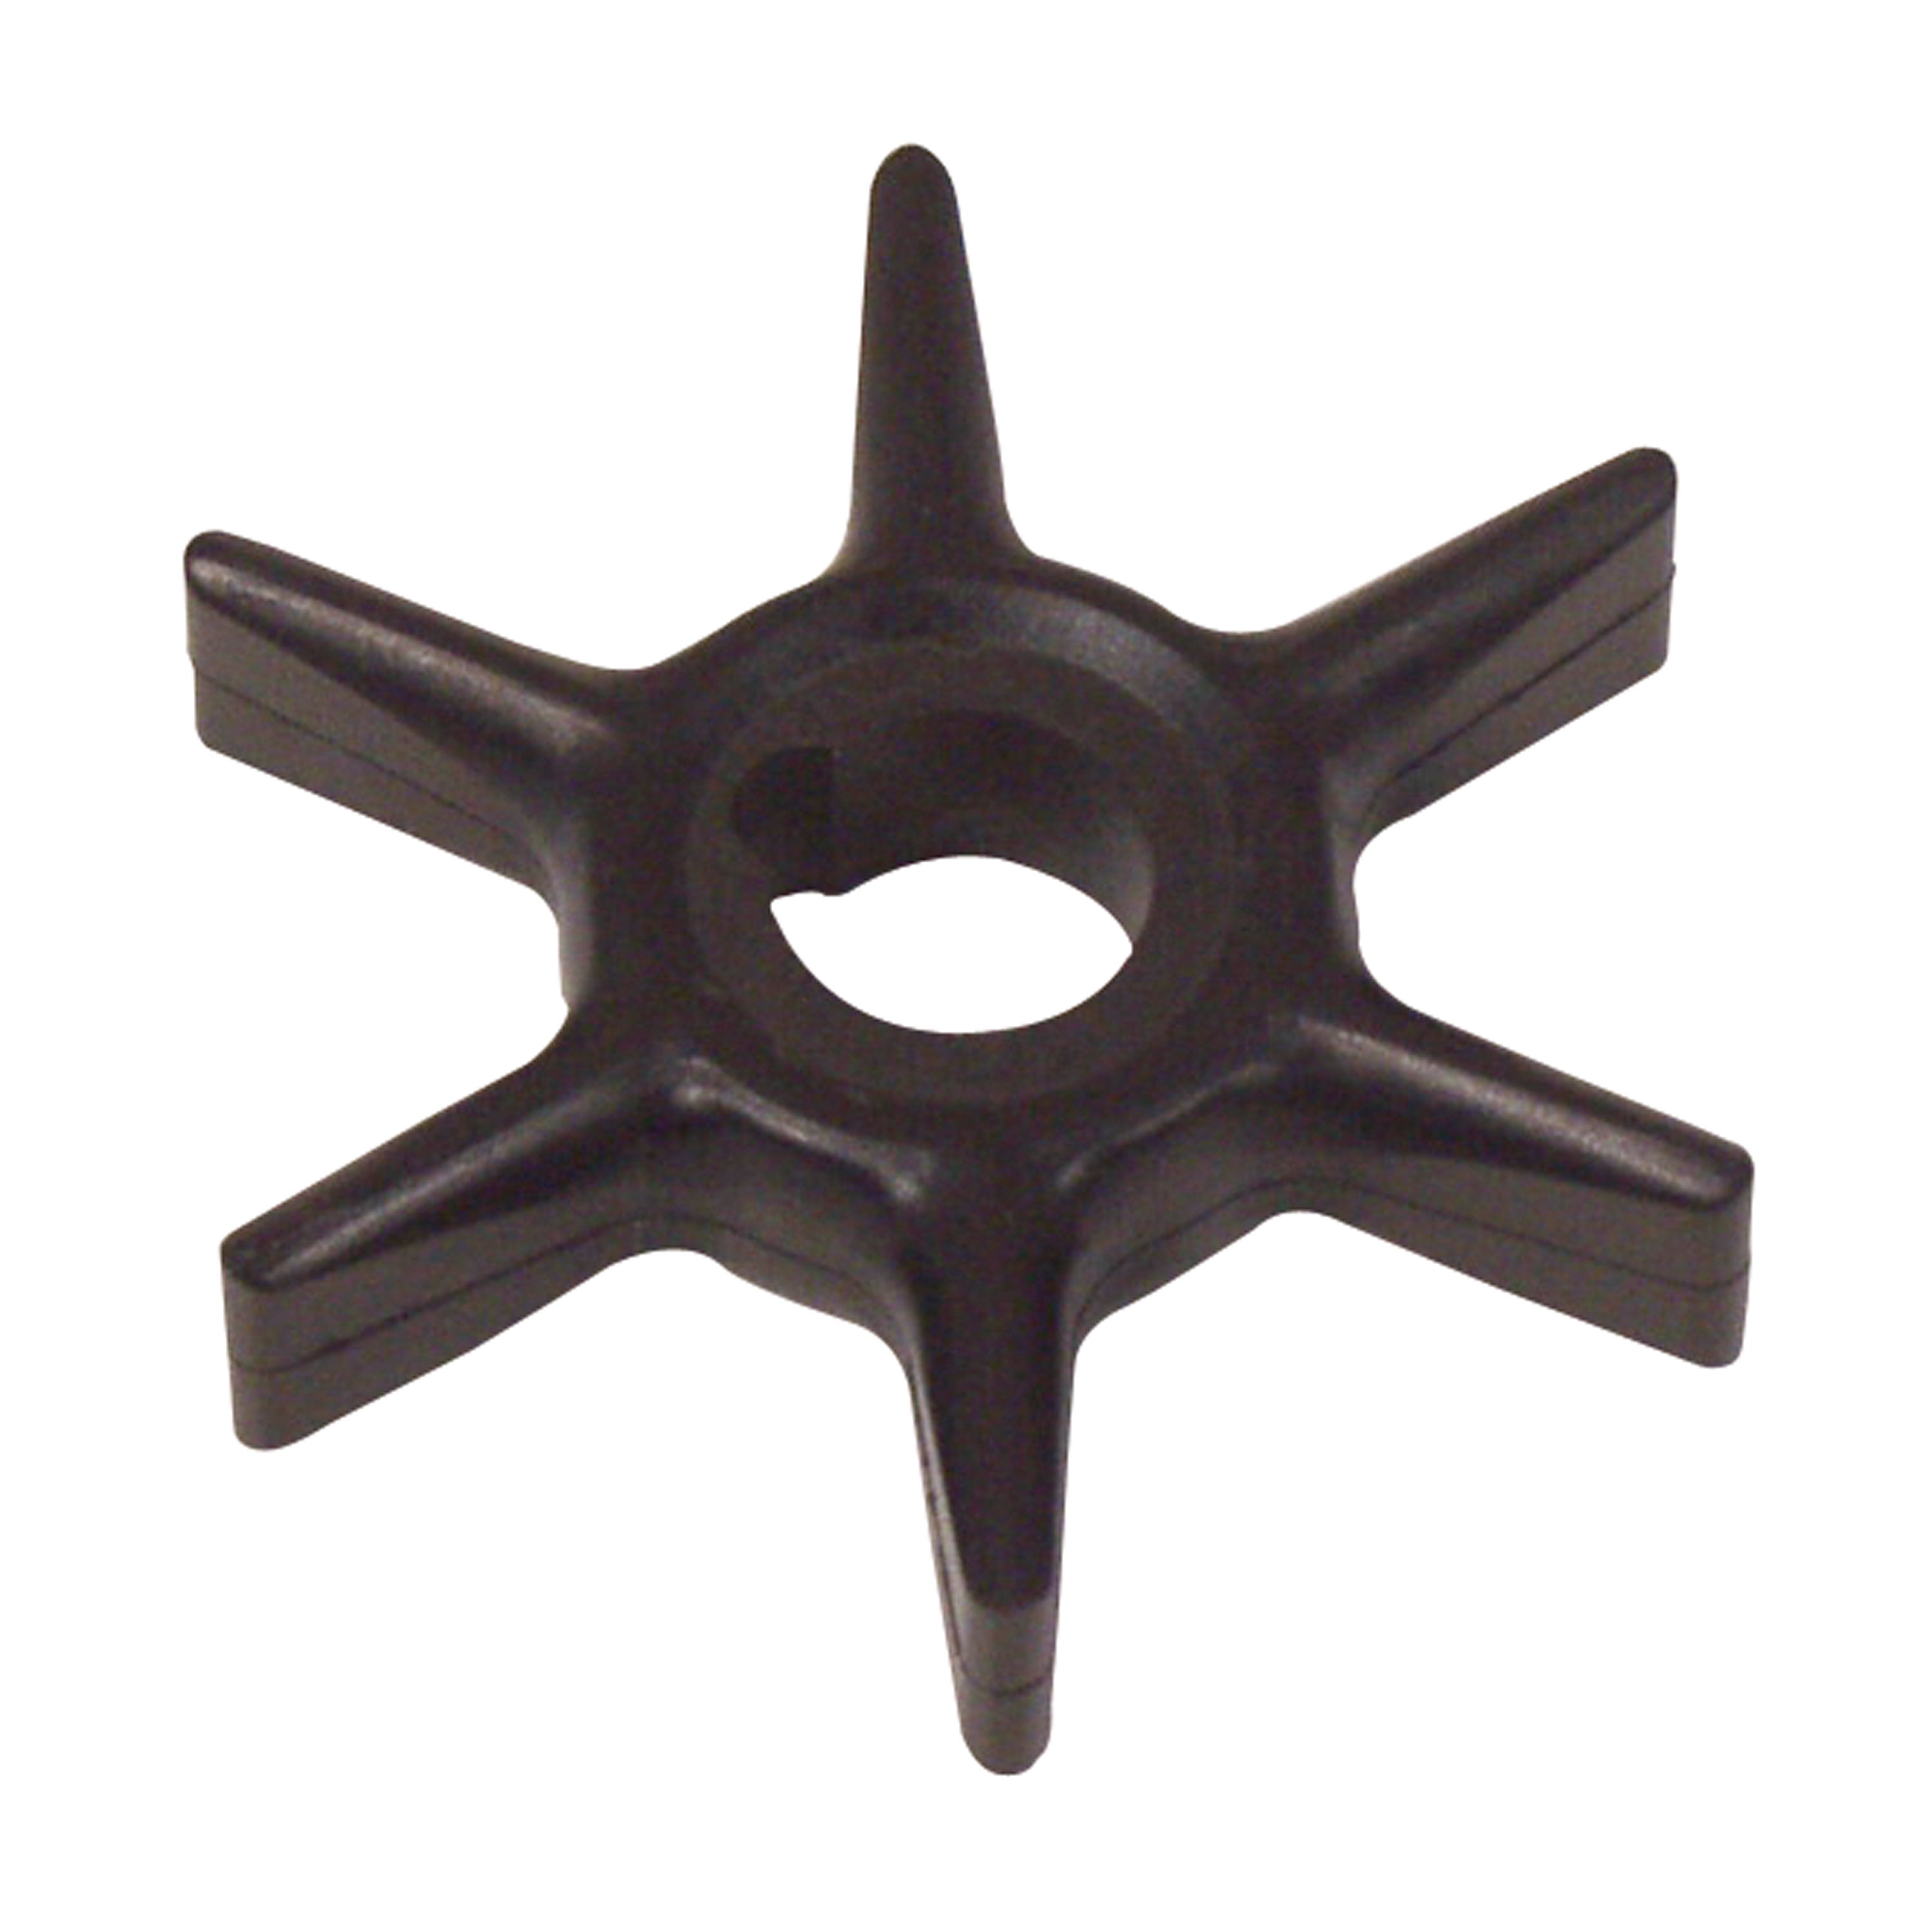 Boating Accessories New Impellers Sierra 18-3062 Replaces Chrysler/Mercury 47-42038-2 